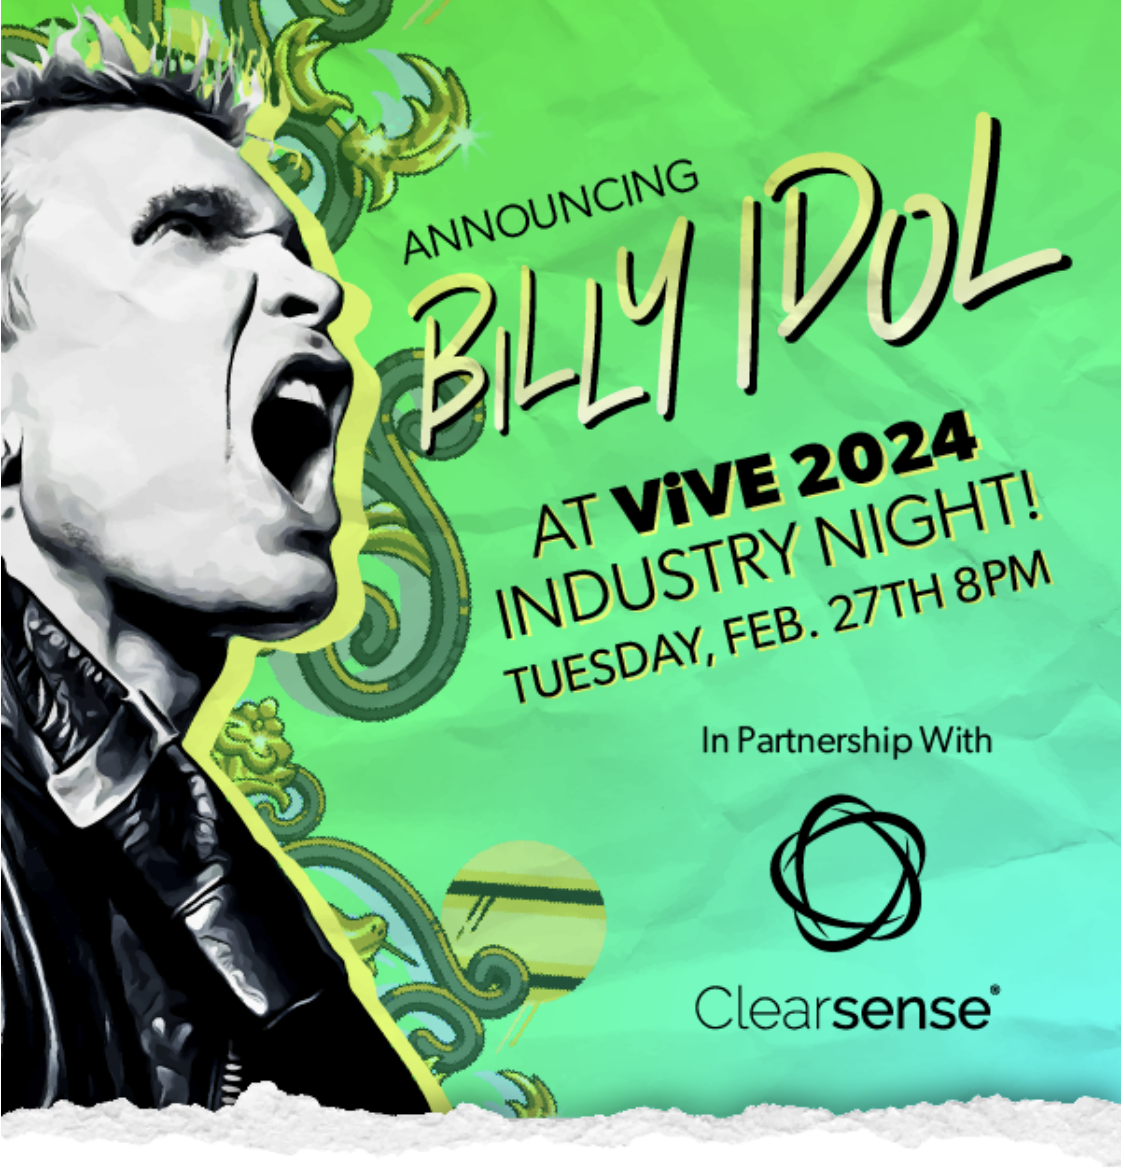 Billy Idol is playing ViVE 2024's Industry Night in partnership with Clearsense